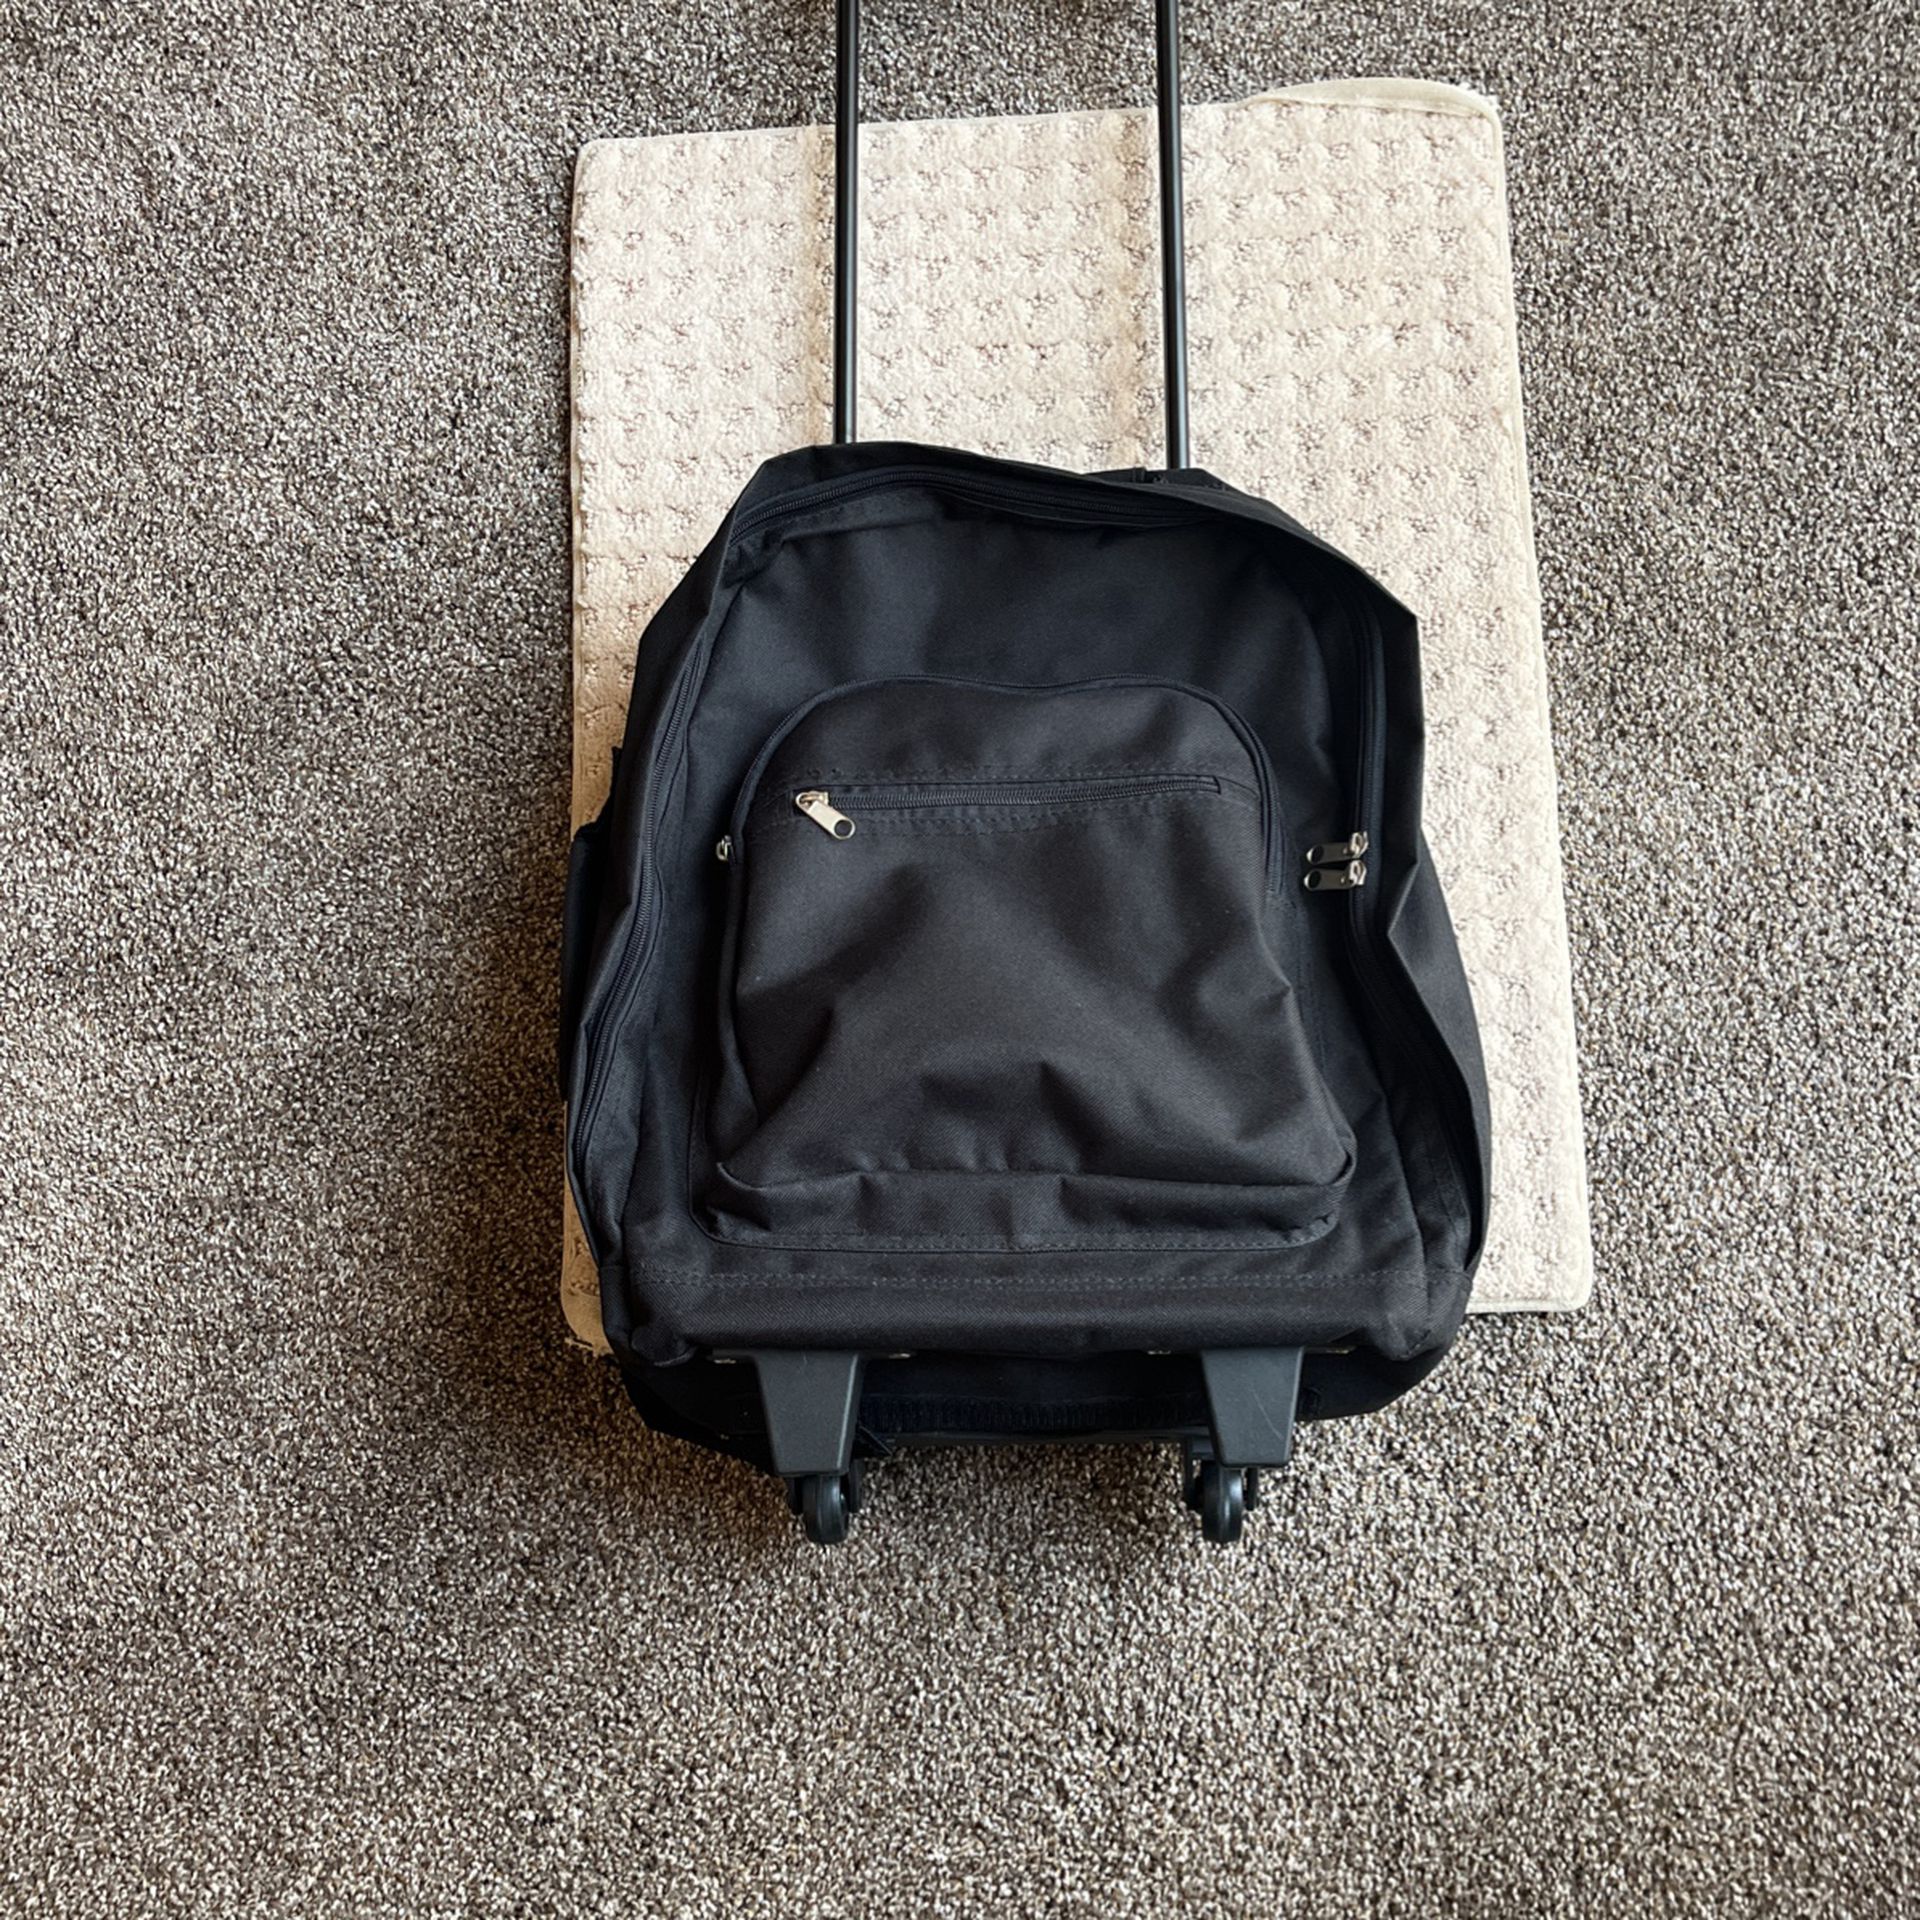 Rolling Backpack